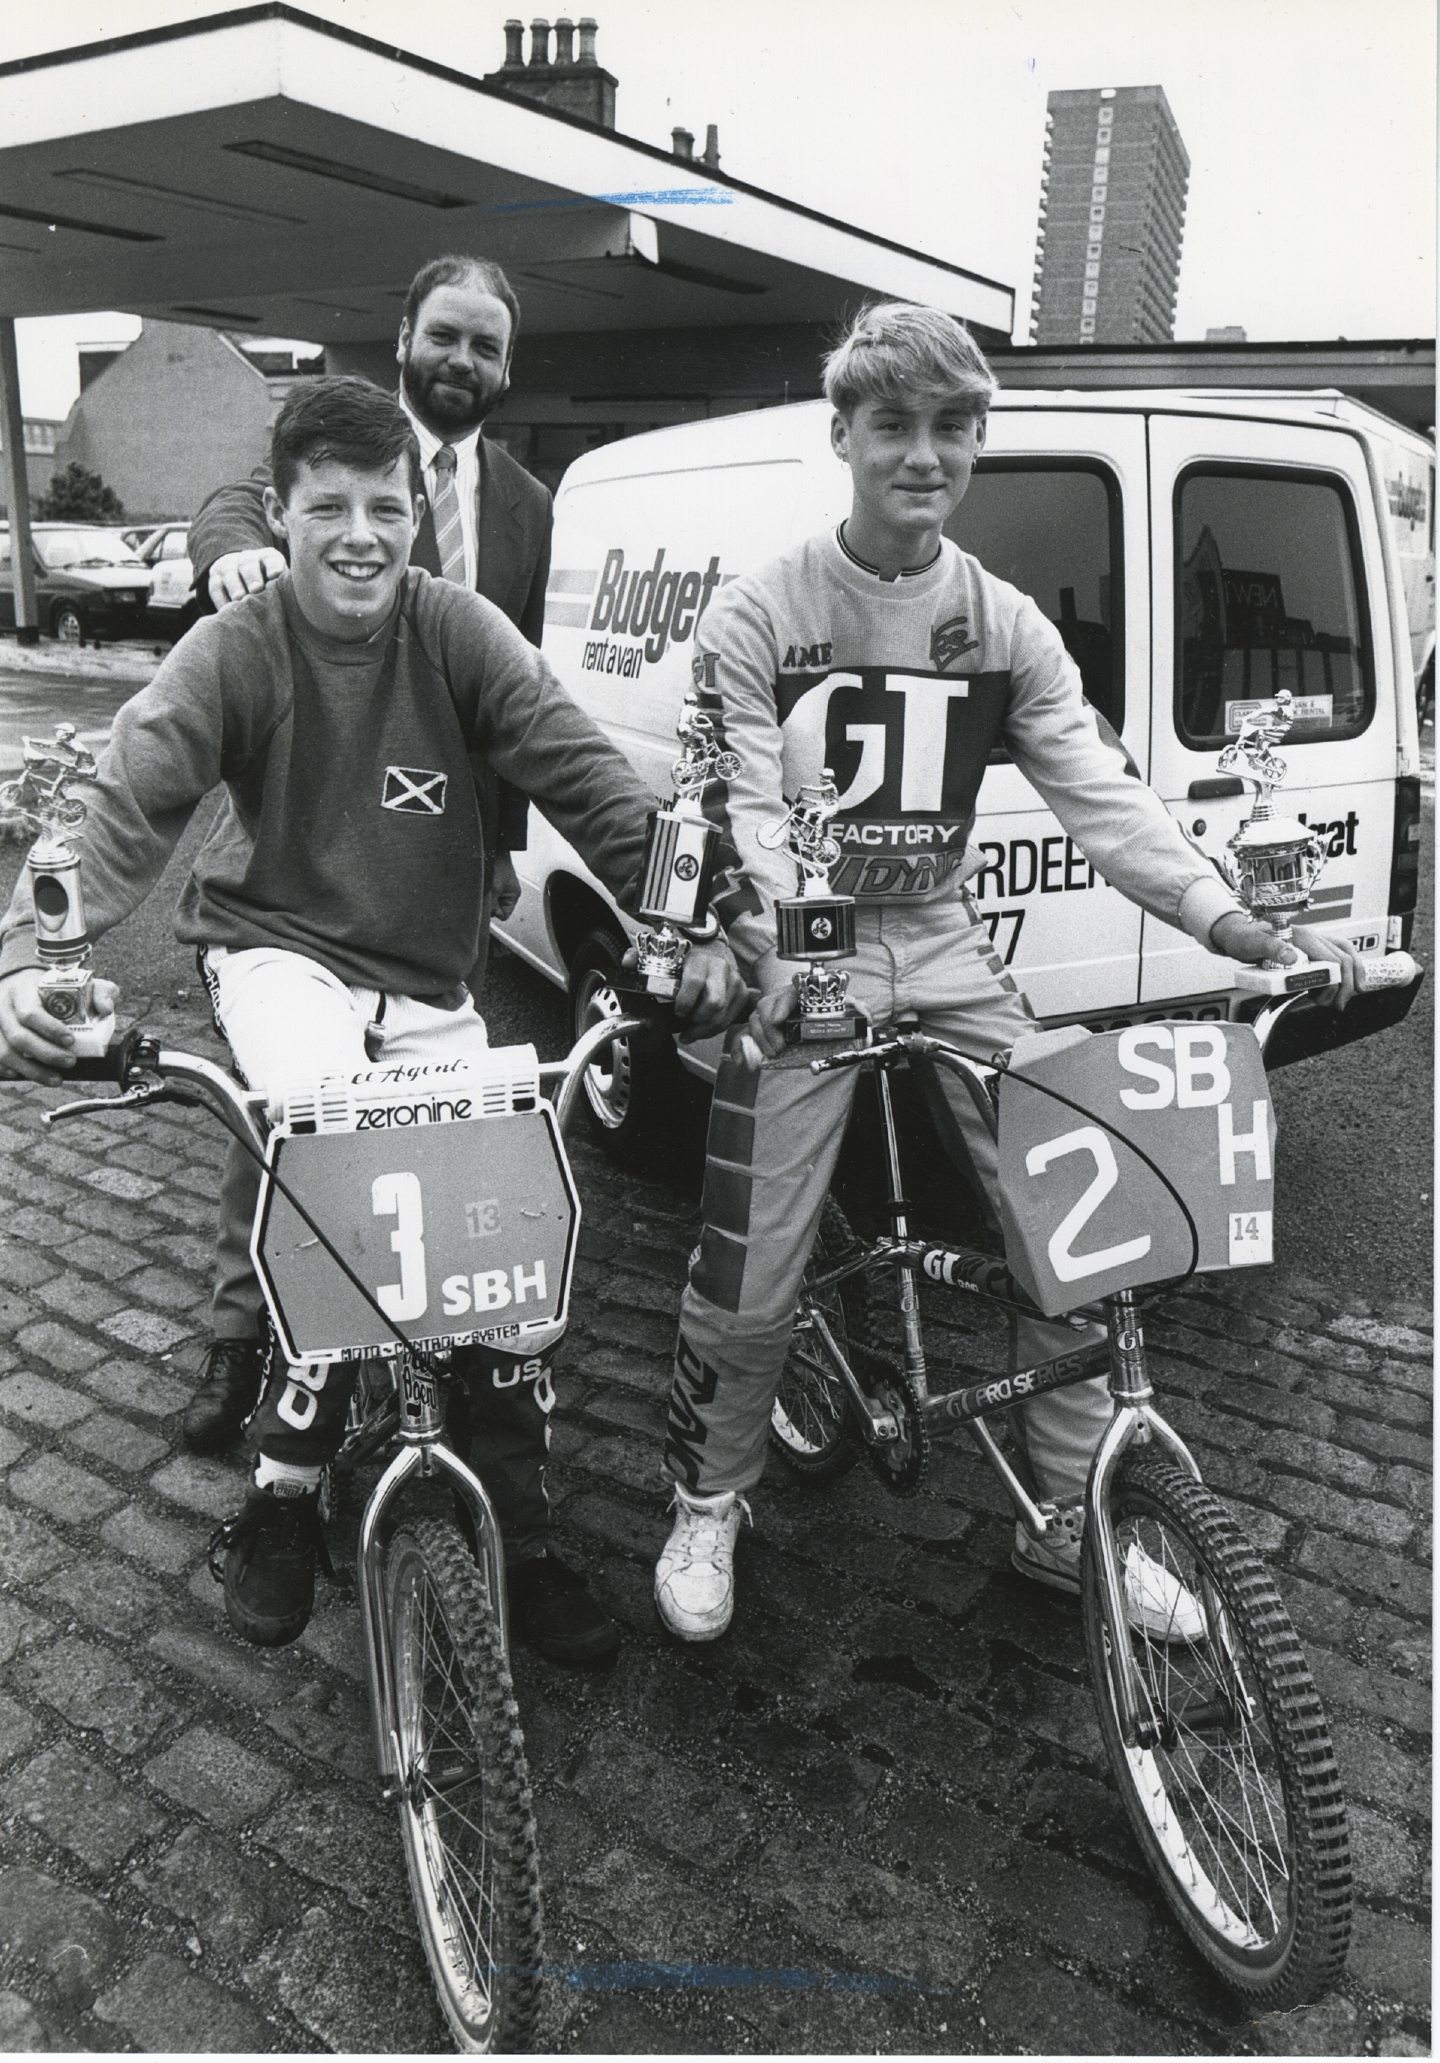 Steven Mitchell and Alan Rhodes after competing in the BMX championships at Alvaston, Derby. They were members of the Bennachie Bandits BMX Racing Club.